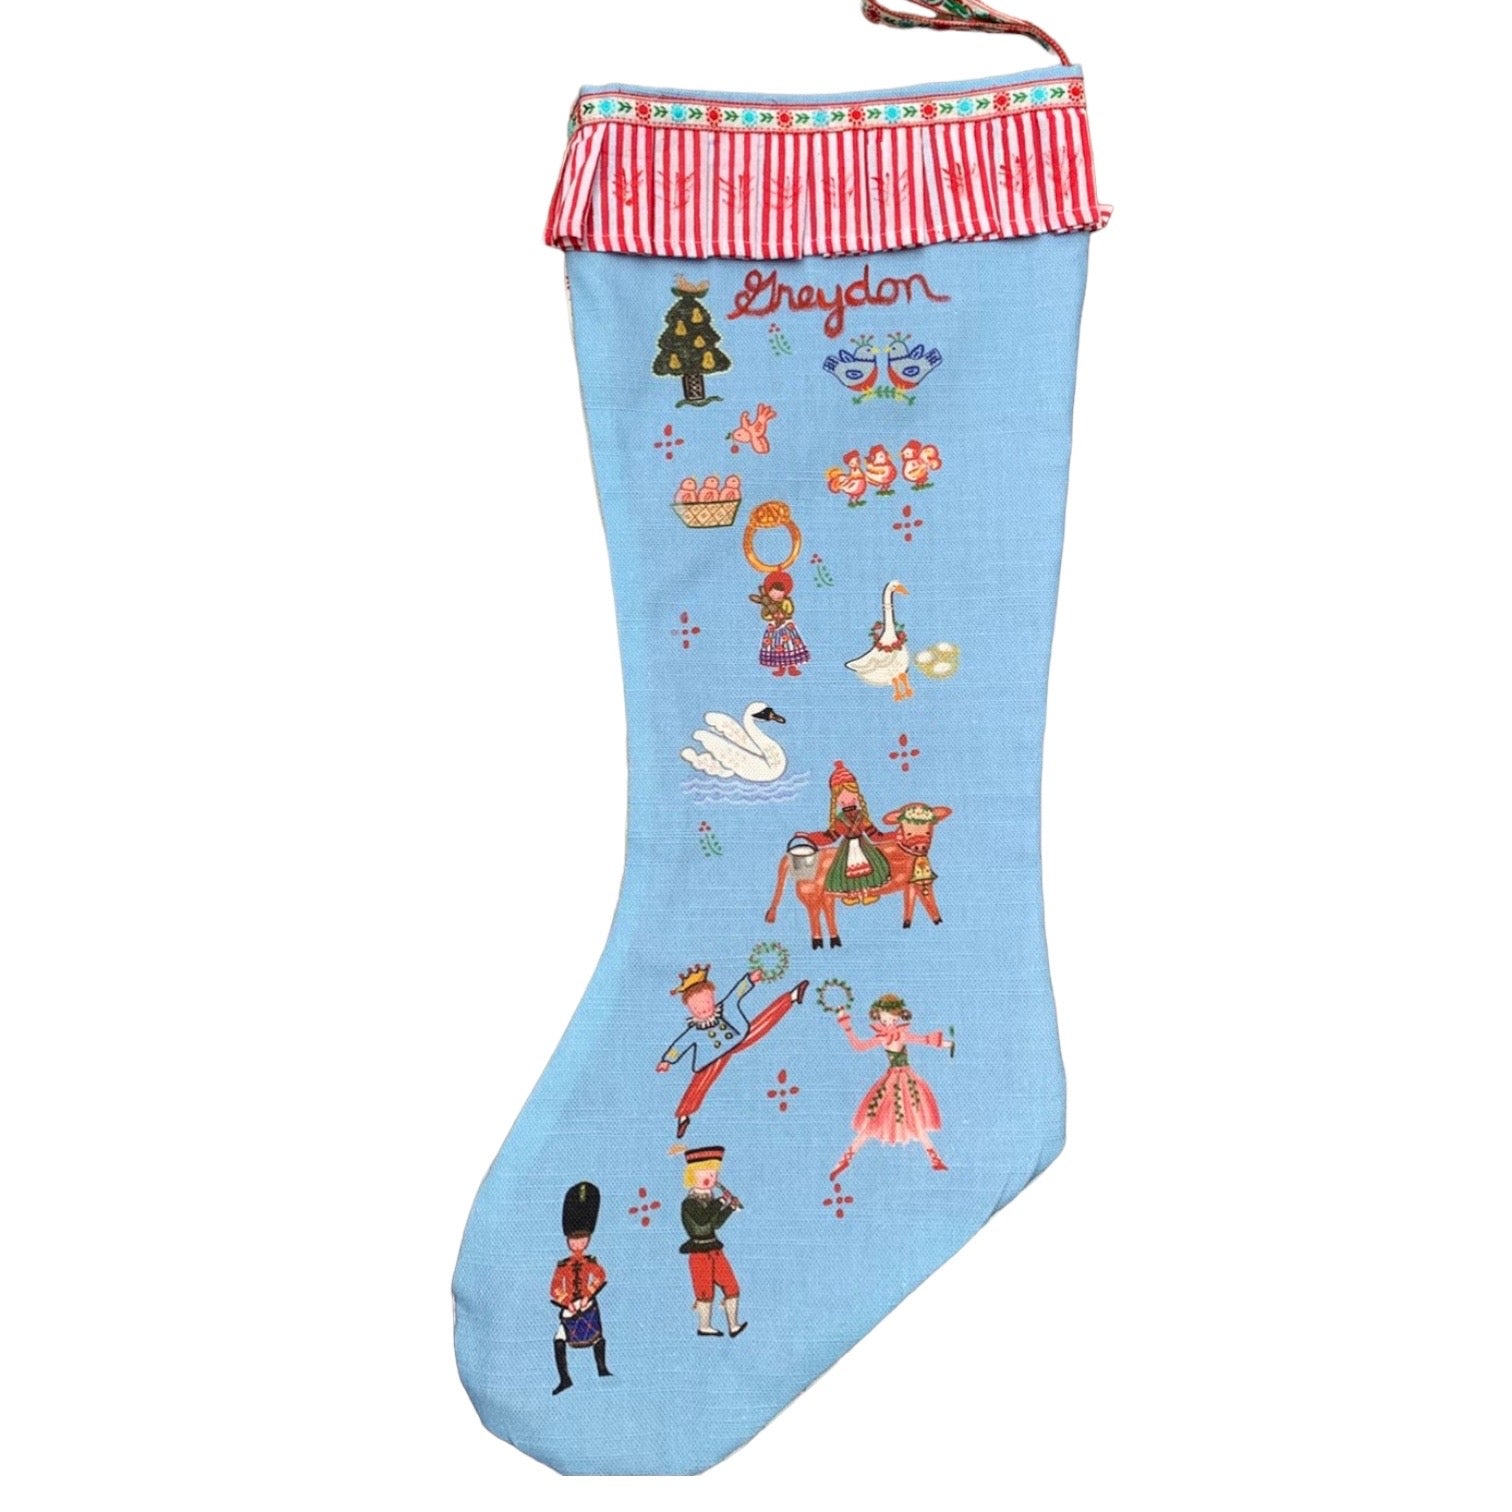 12 Days Stocking - Blue - Premium  from Tricia Lowenfield Design 